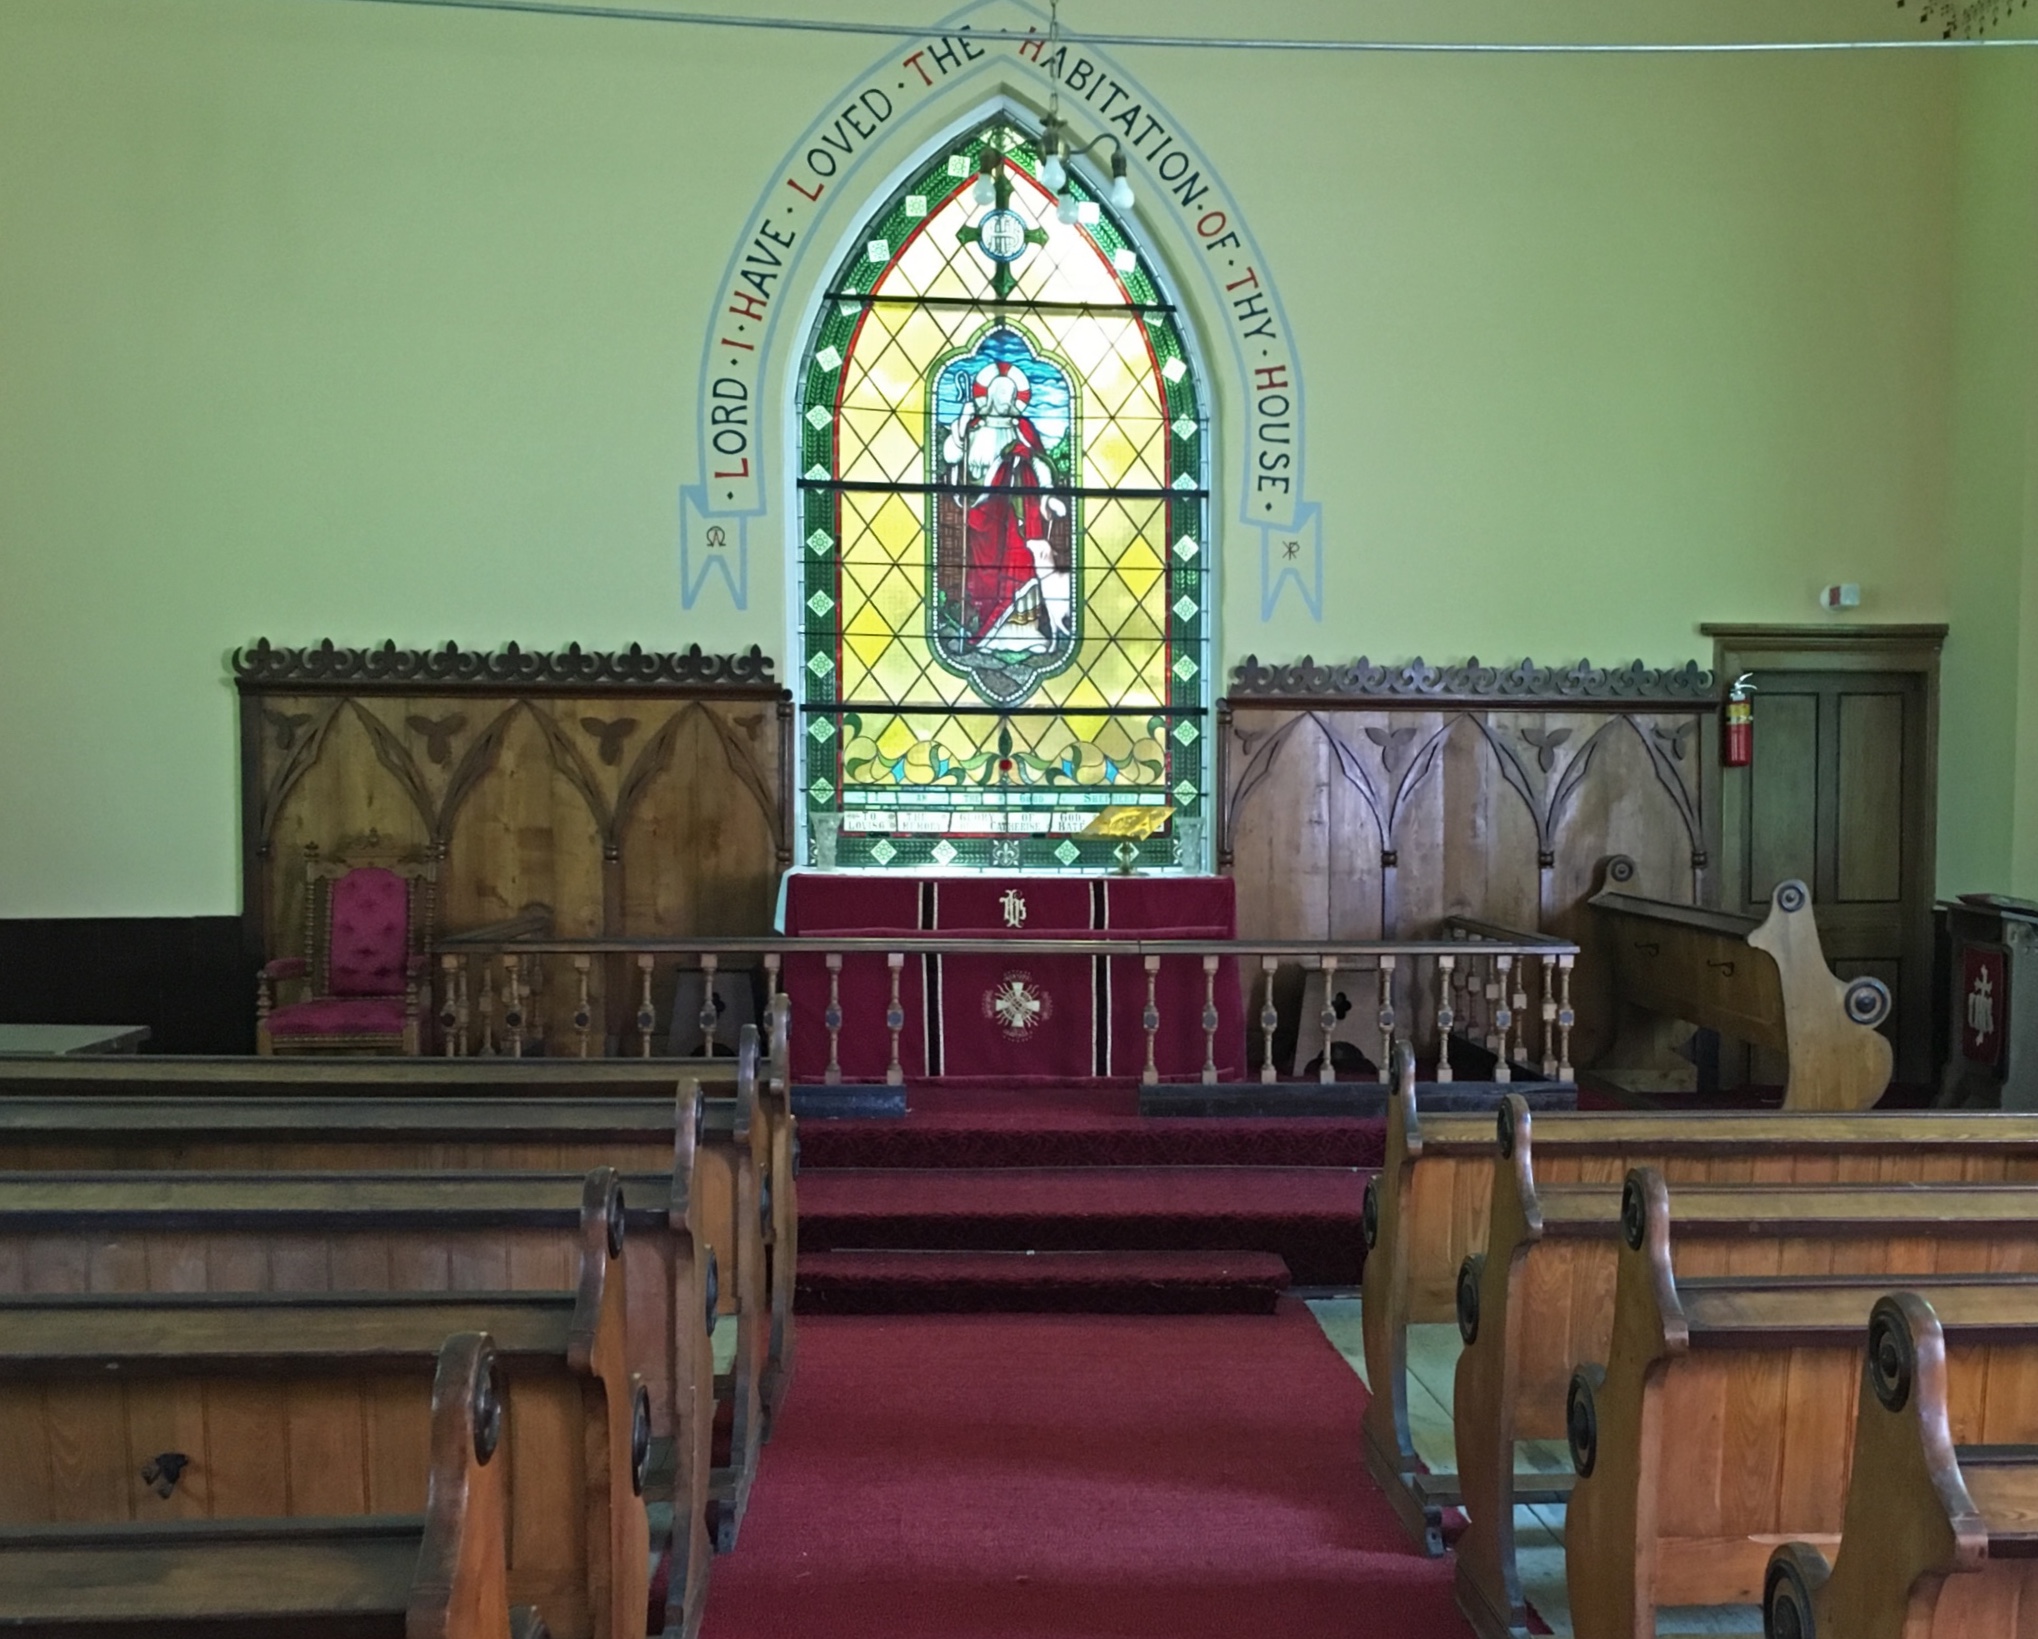 Colour photograph of St. Bartholomew's Anglican church interior, wooden pews, wooden backdrop to altar, a plain wall in the centre of which is a stained glass window.